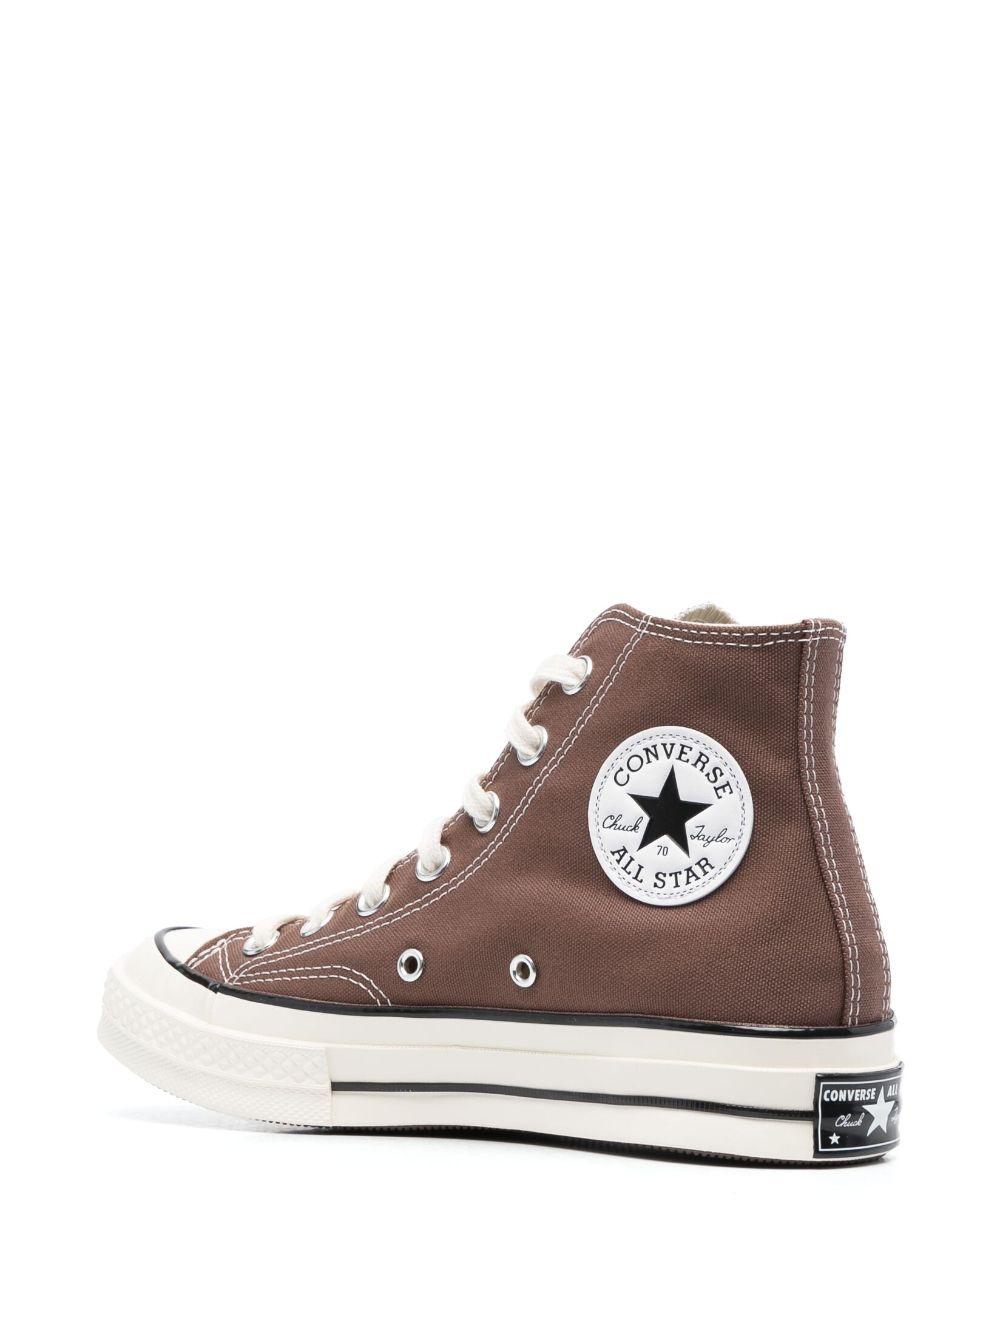 Converse Chuck Taylor Hi-top Sneakers in Brown | Lyst